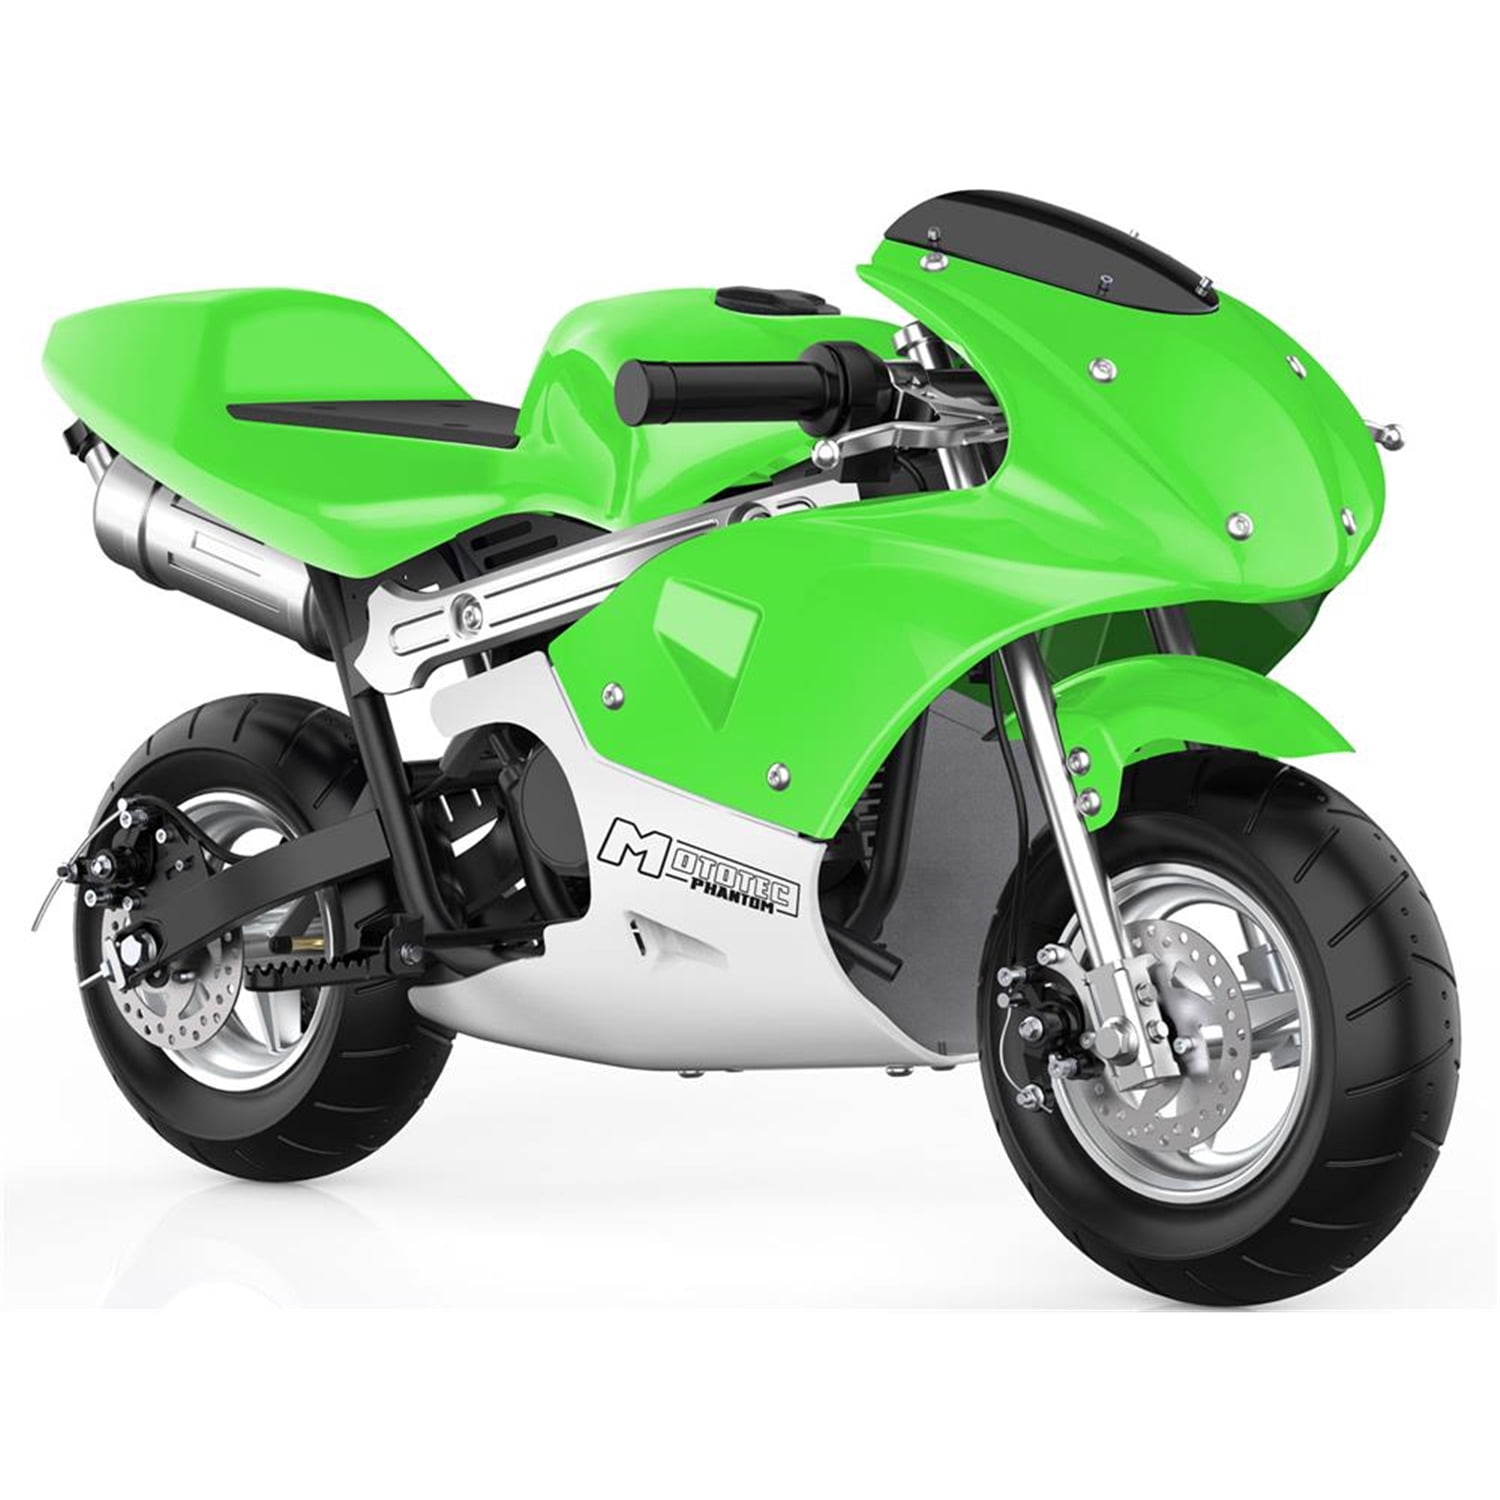 2020 4-STROKE 40cc GAS POCKET BIKE Mini-MOTORCYCLE for kids and Teens NO CA SALE 